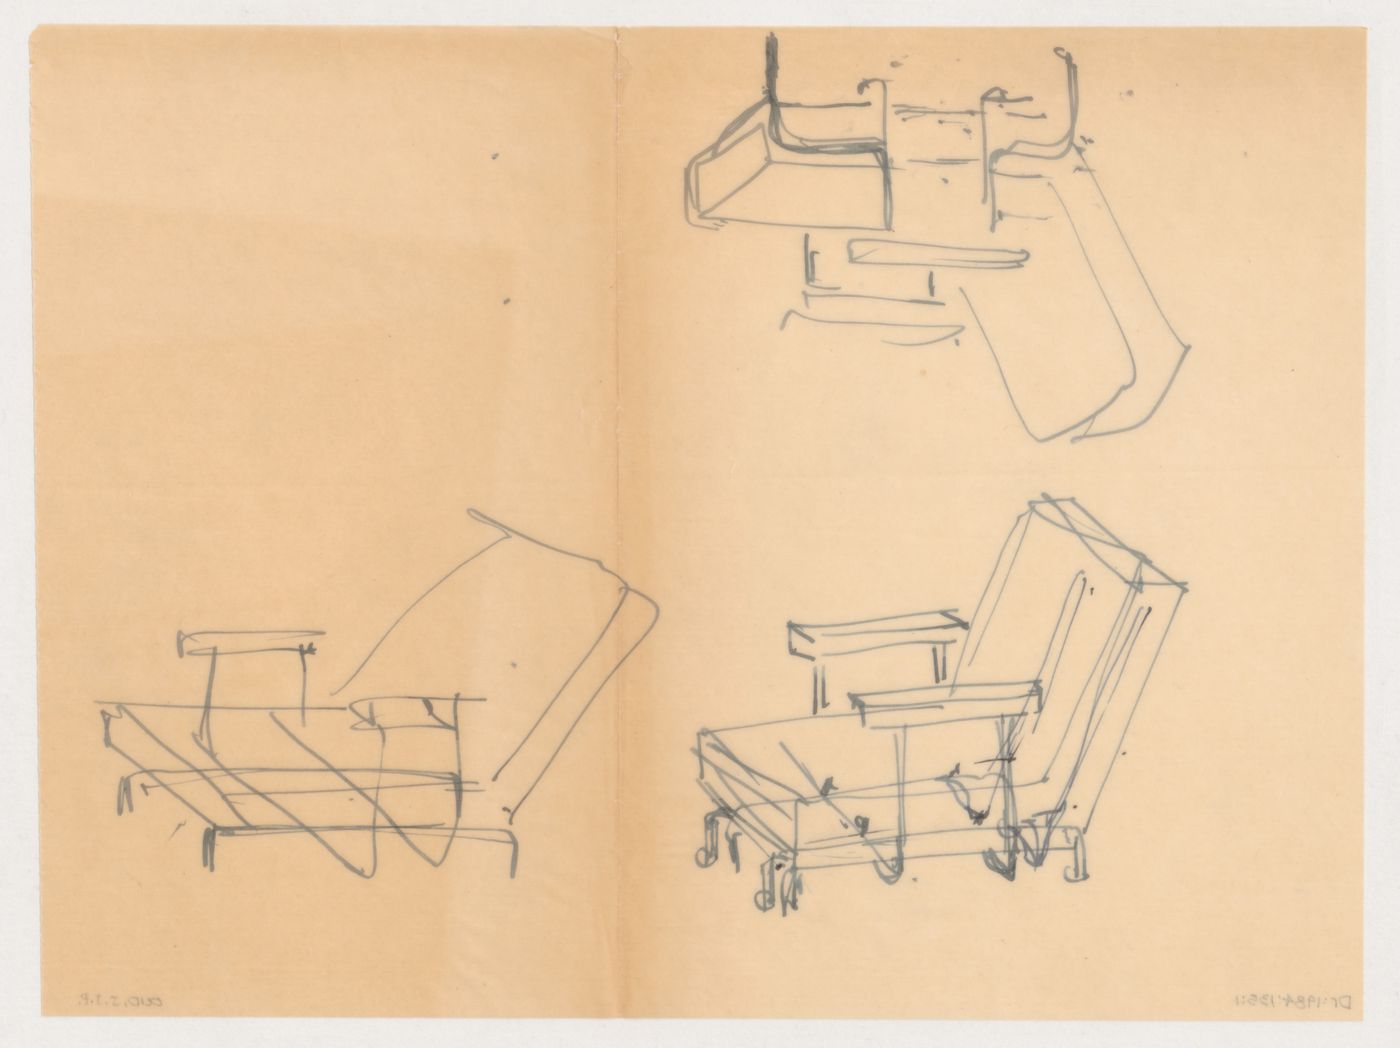 Sketch perspectives for a chair, possibly for Metz & Co., Amsterdam, Netherlands